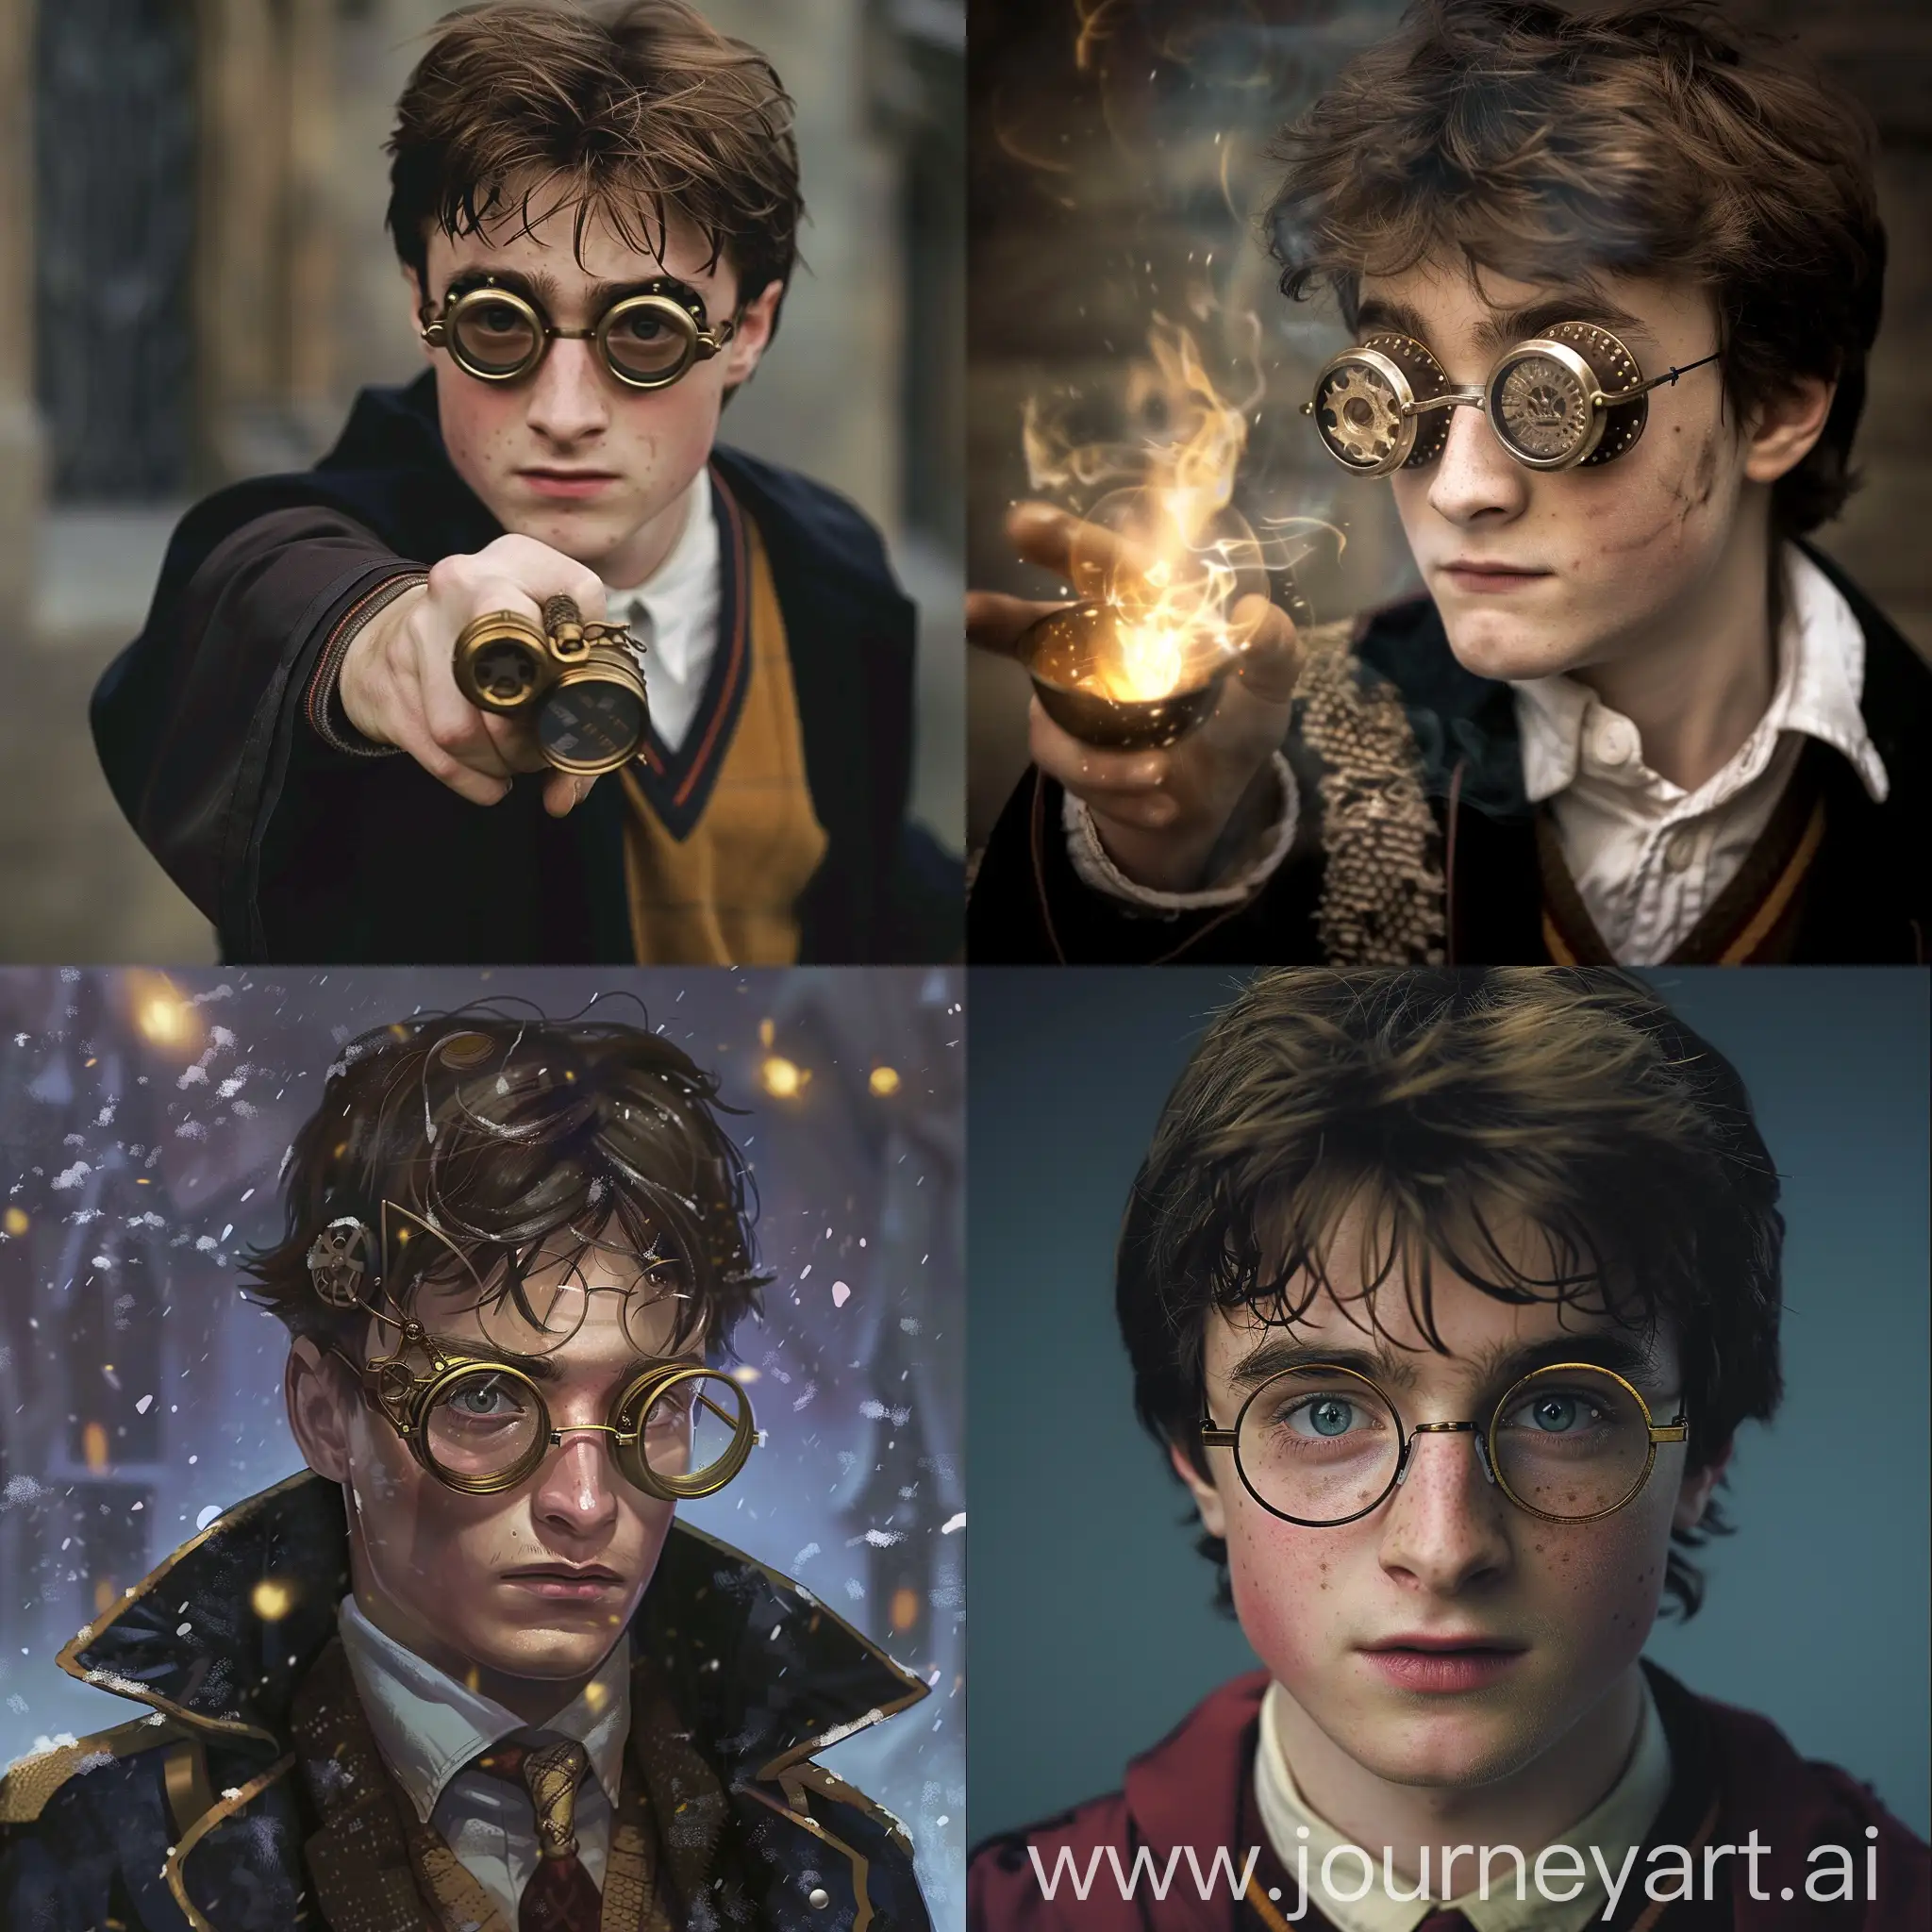 Harry-Potter-Character-Summoning-Patronus-Spell-with-Steampunk-Glasses-in-Quidditch-Setting